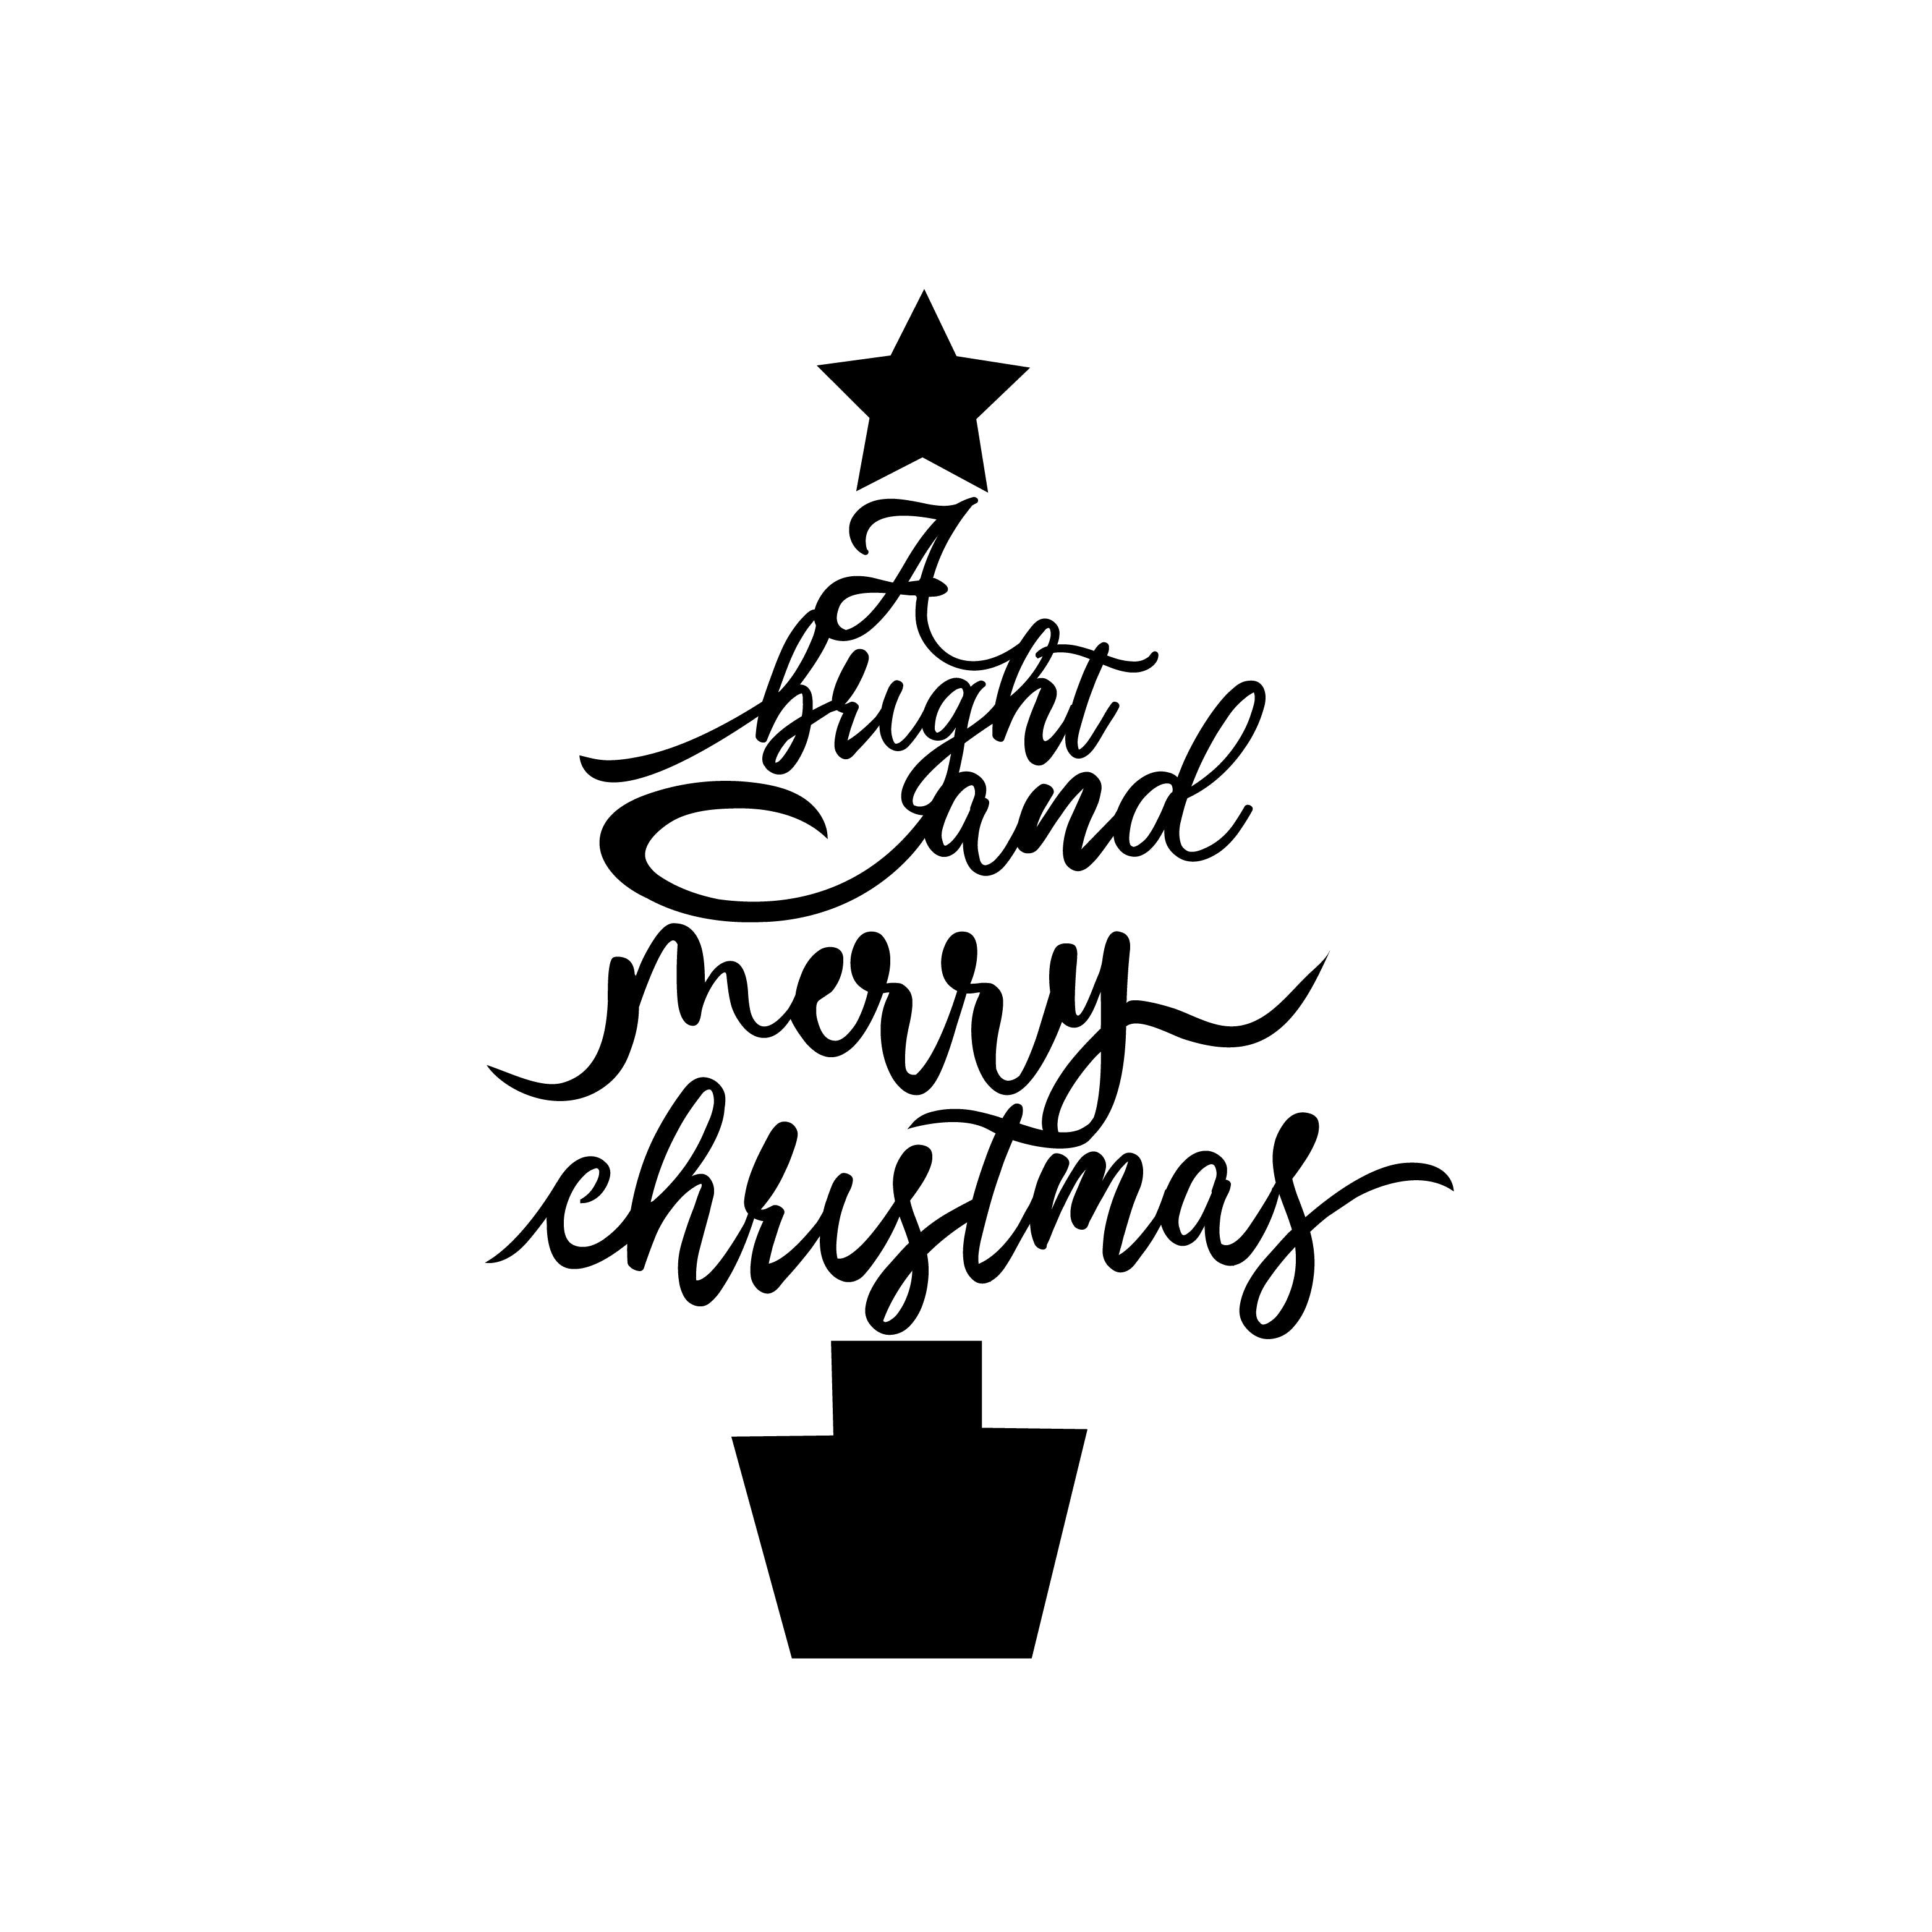 "A Bright and Merry Christmas" Black Engineered Wood Wall Art Cutout, Ready to Hang Home Decor 2